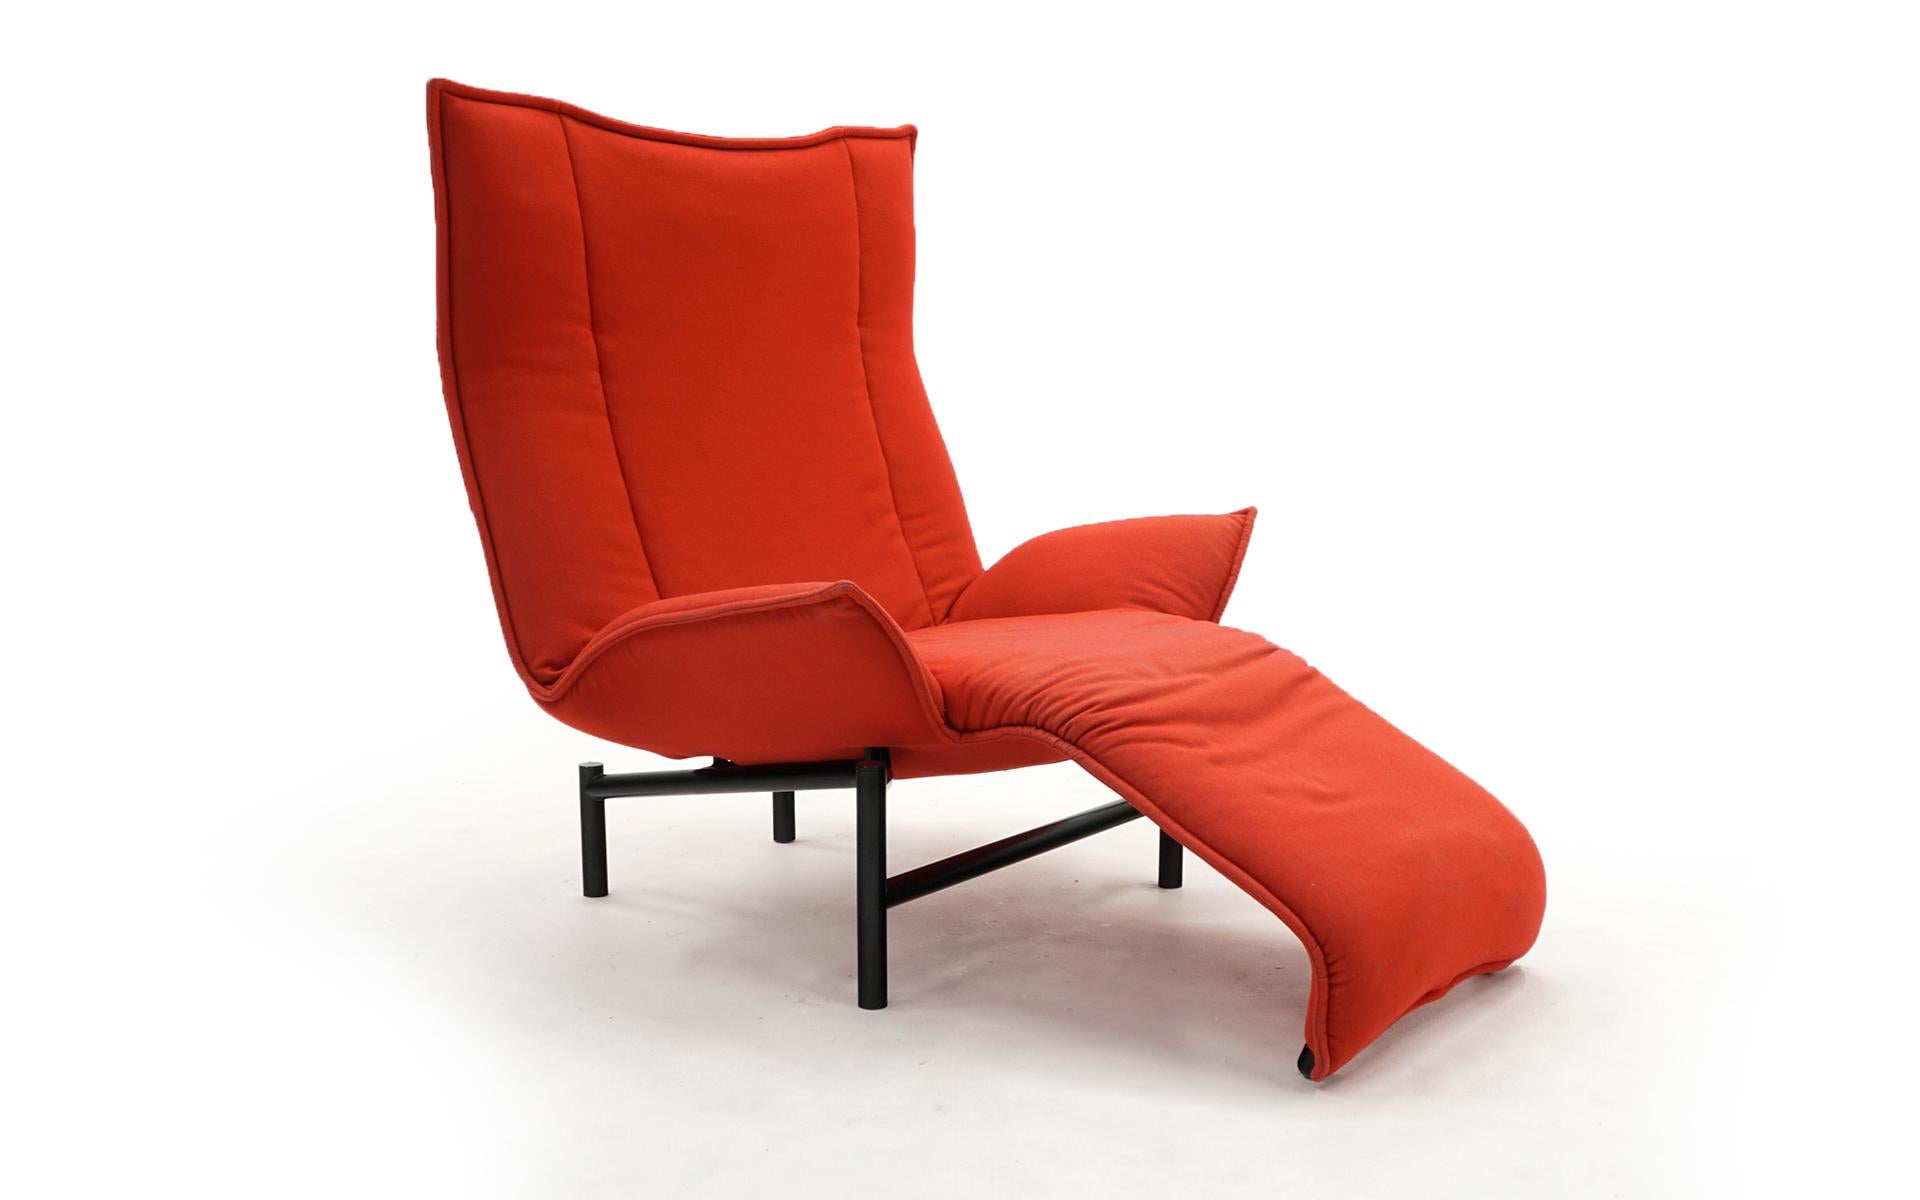 Steel Reclining Veranda Lounge Chair by Vico Magistretti for Cassina, Red, Black Frame For Sale